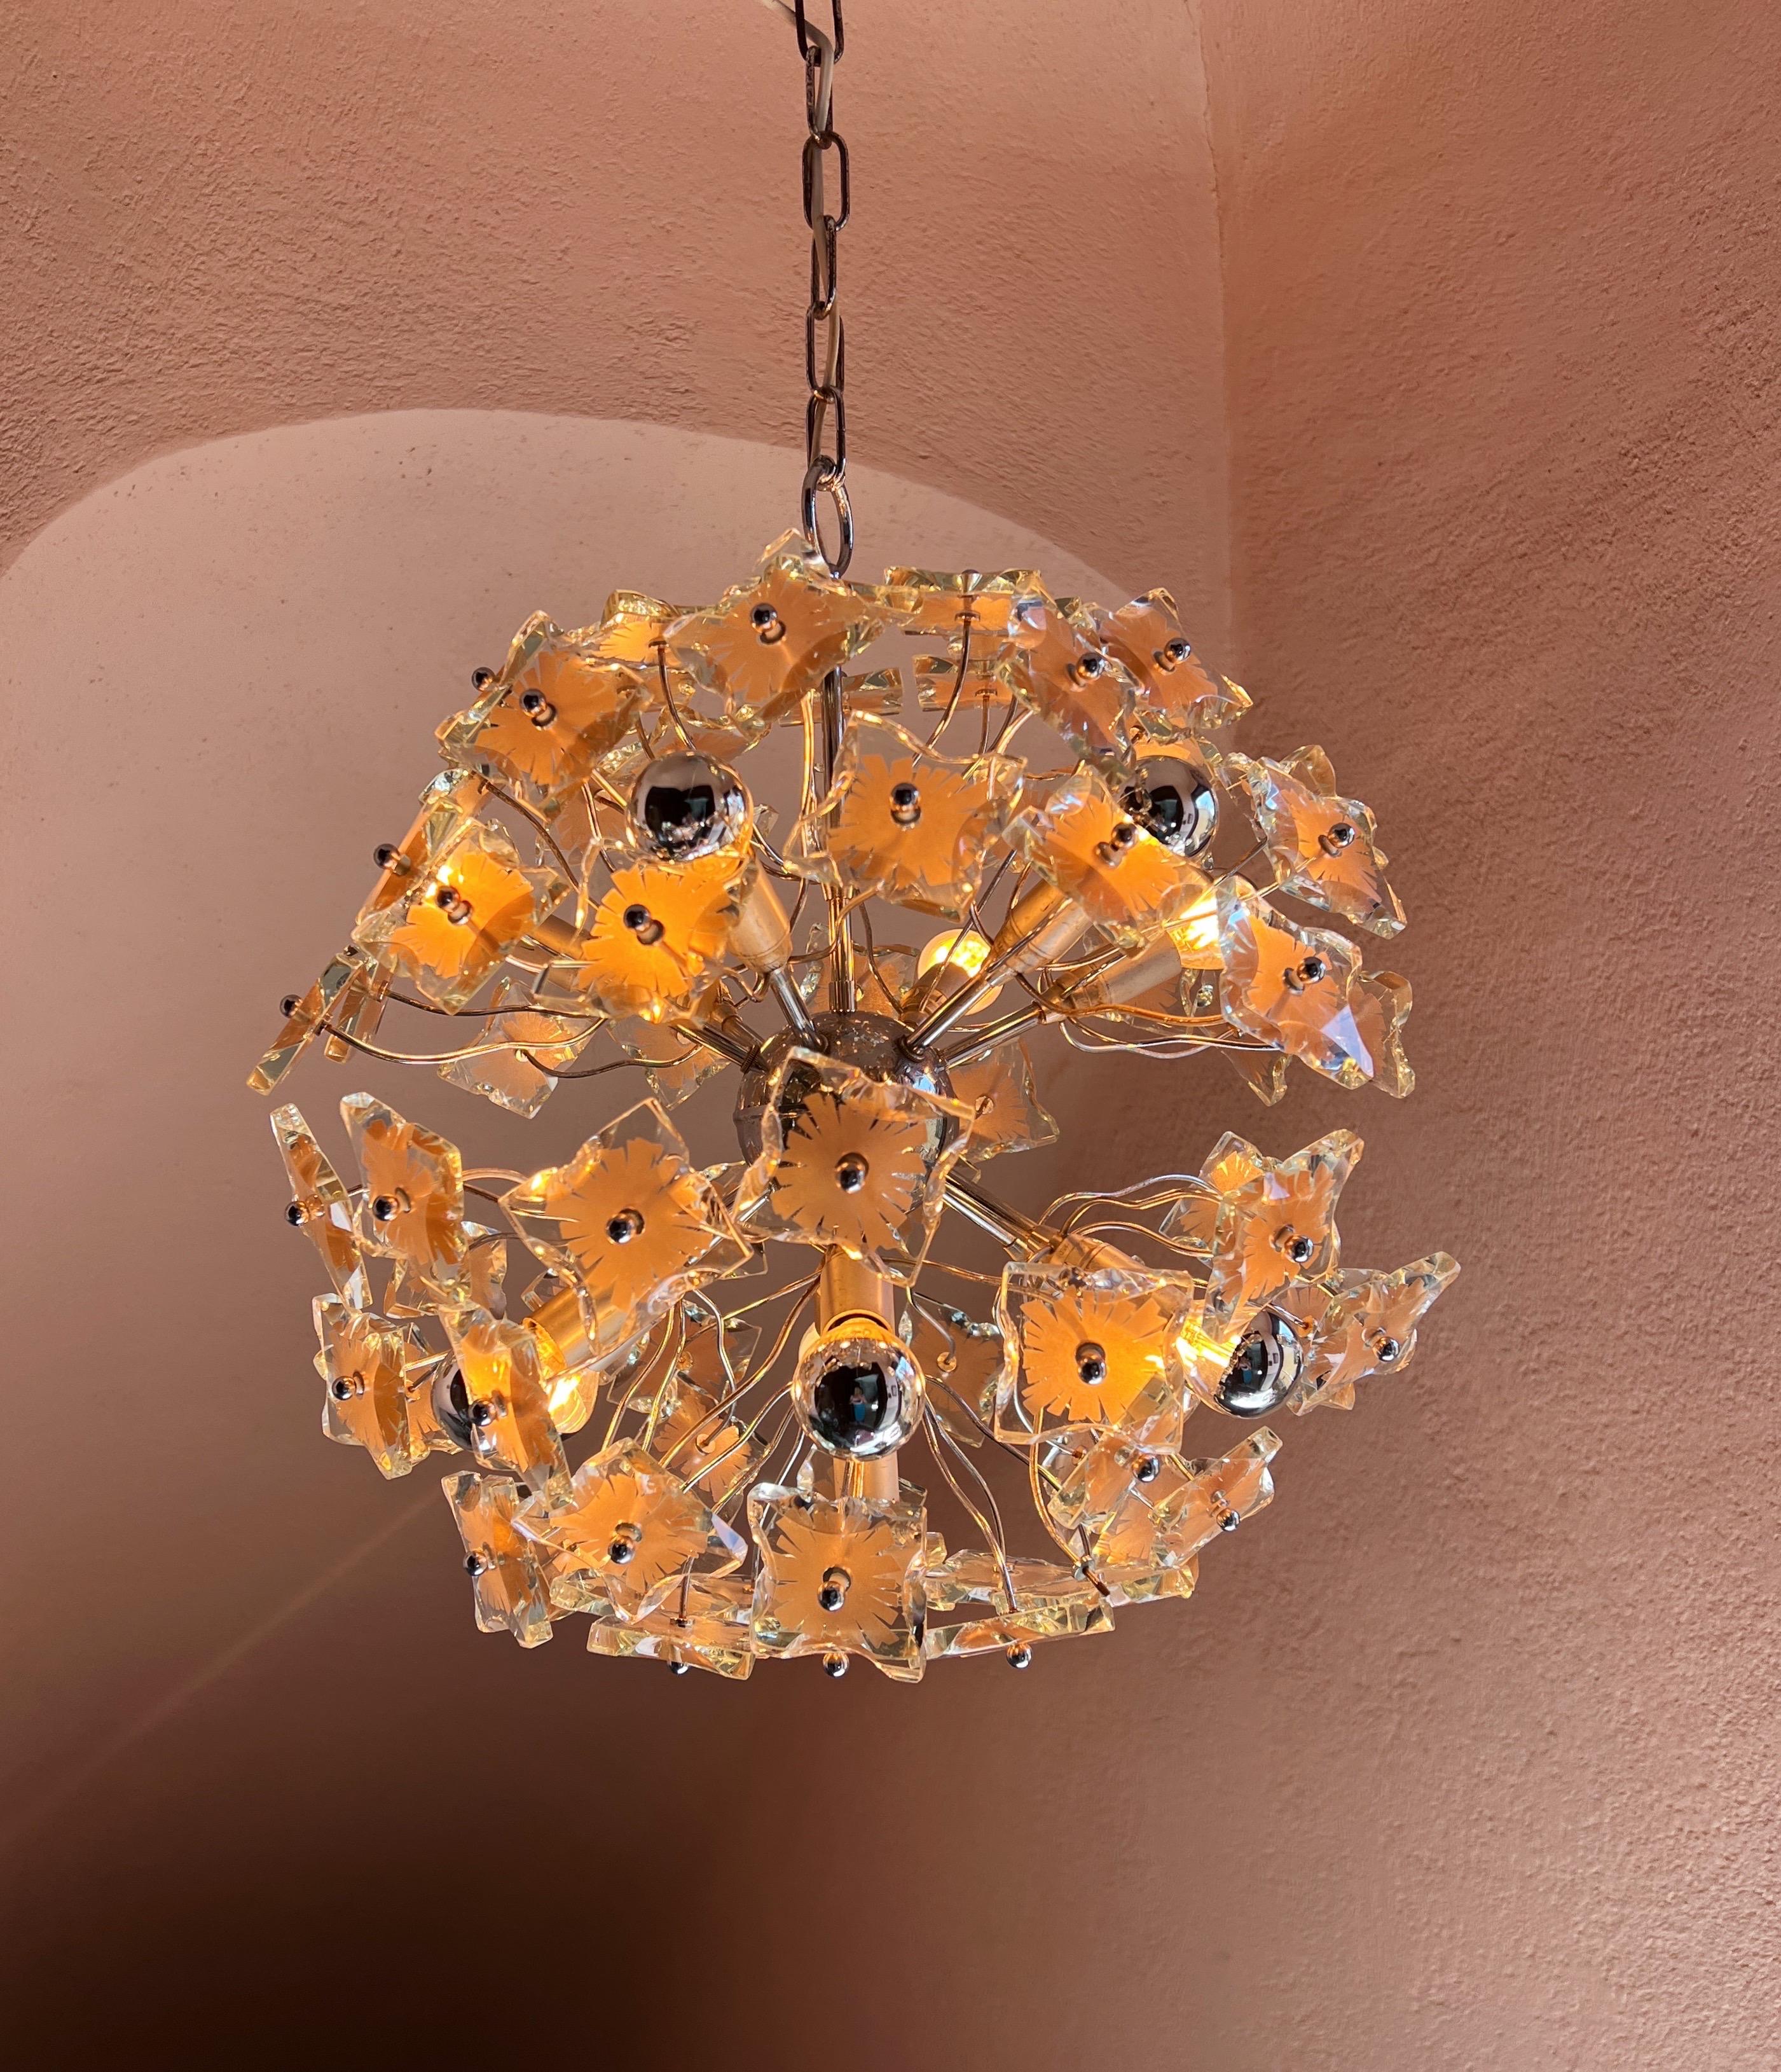 Chandelier designed by Fontana Arte, crafted in the 1960s. This masterpiece of lighting showcases the meticulous craftsmanship that Italy is celebrated for.

Skillfully designed by Fontana Arte, a renowned Italian company founded in Milan in 1932 by